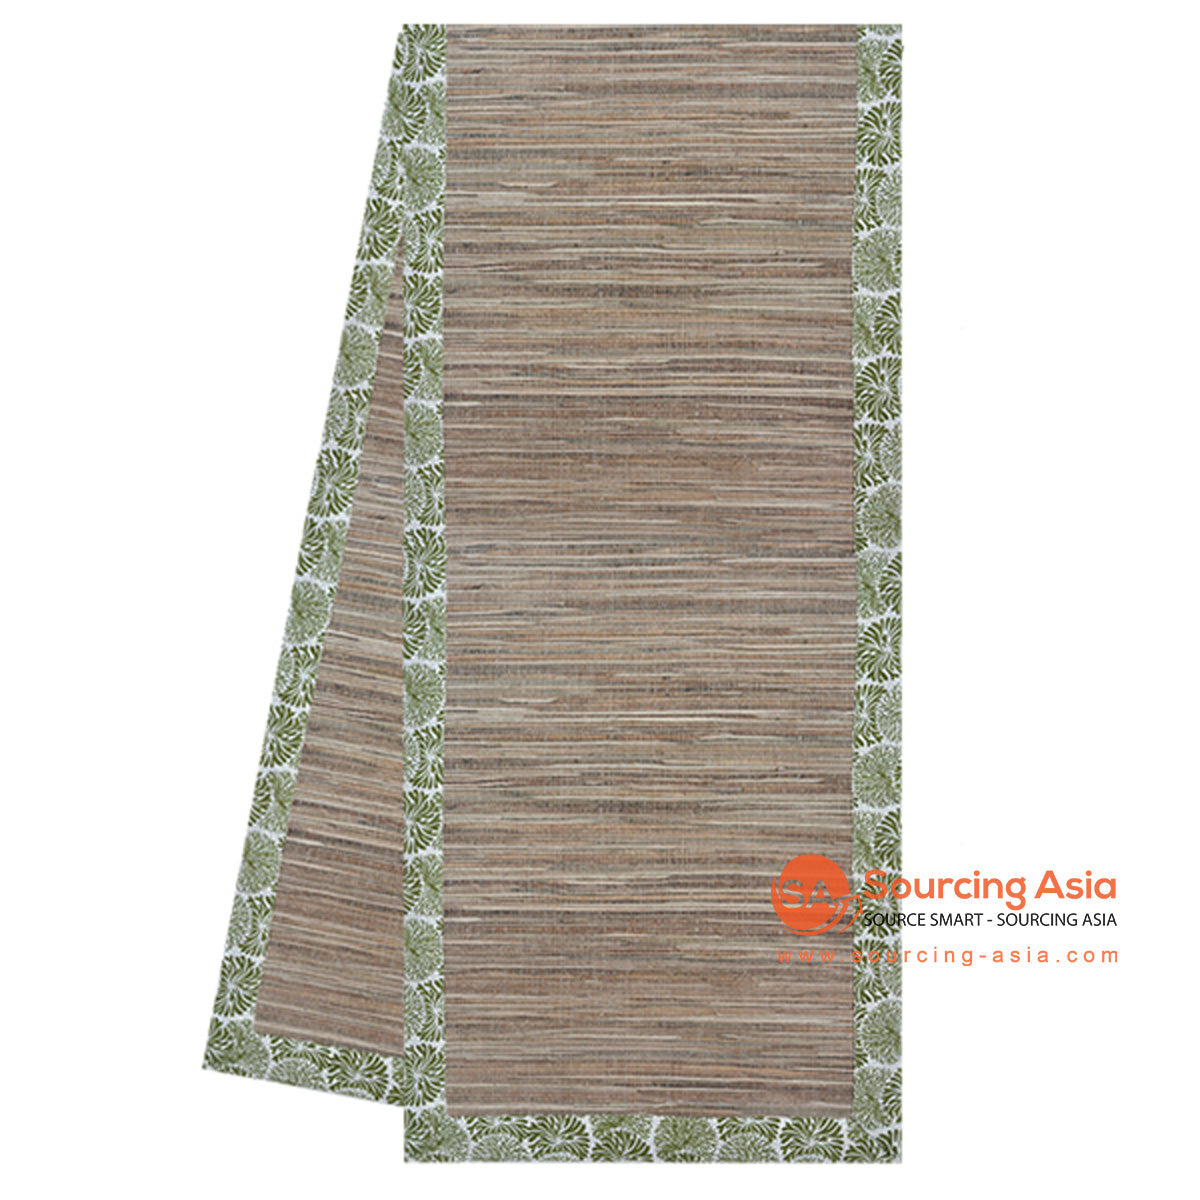 BZN032 WATER HYACINTH AND PRINTED COTTON TABLE RUNNER